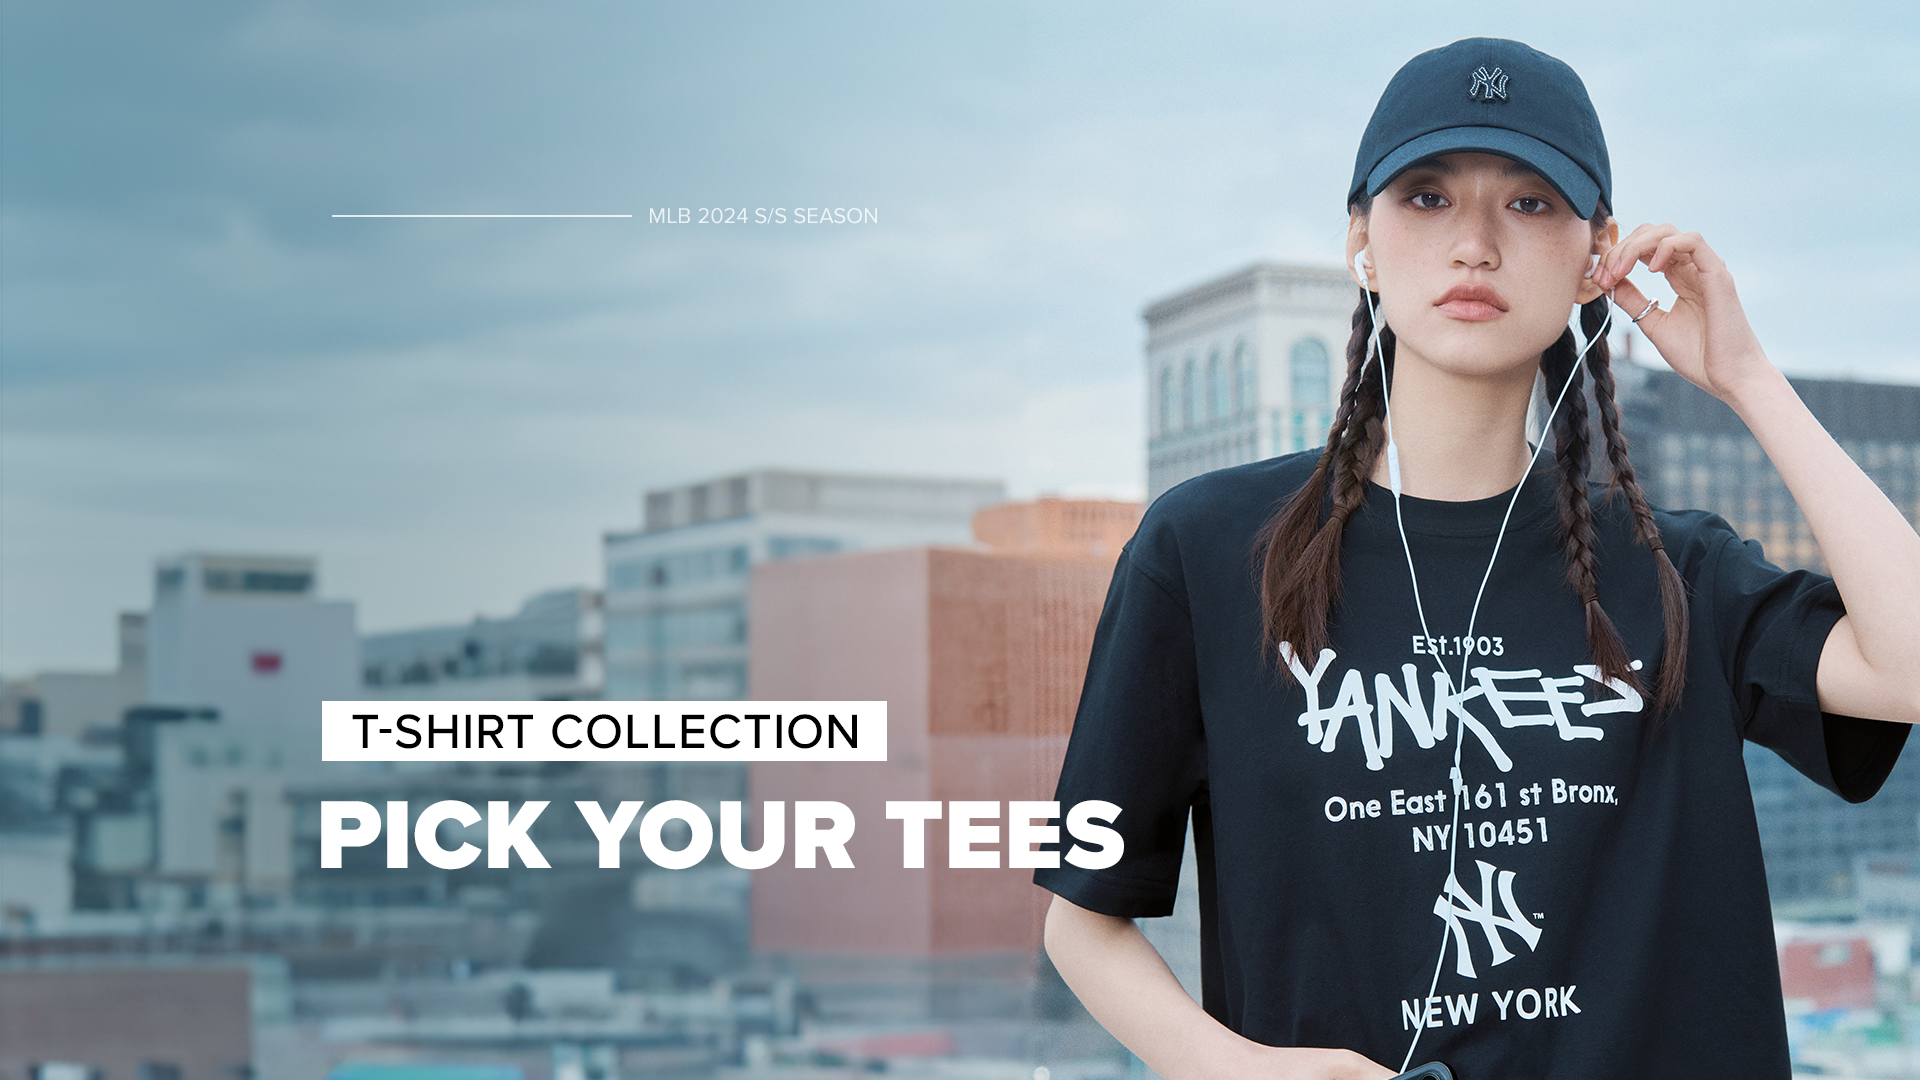 T-SHIRT COLLECTION PICK YOUR TEES